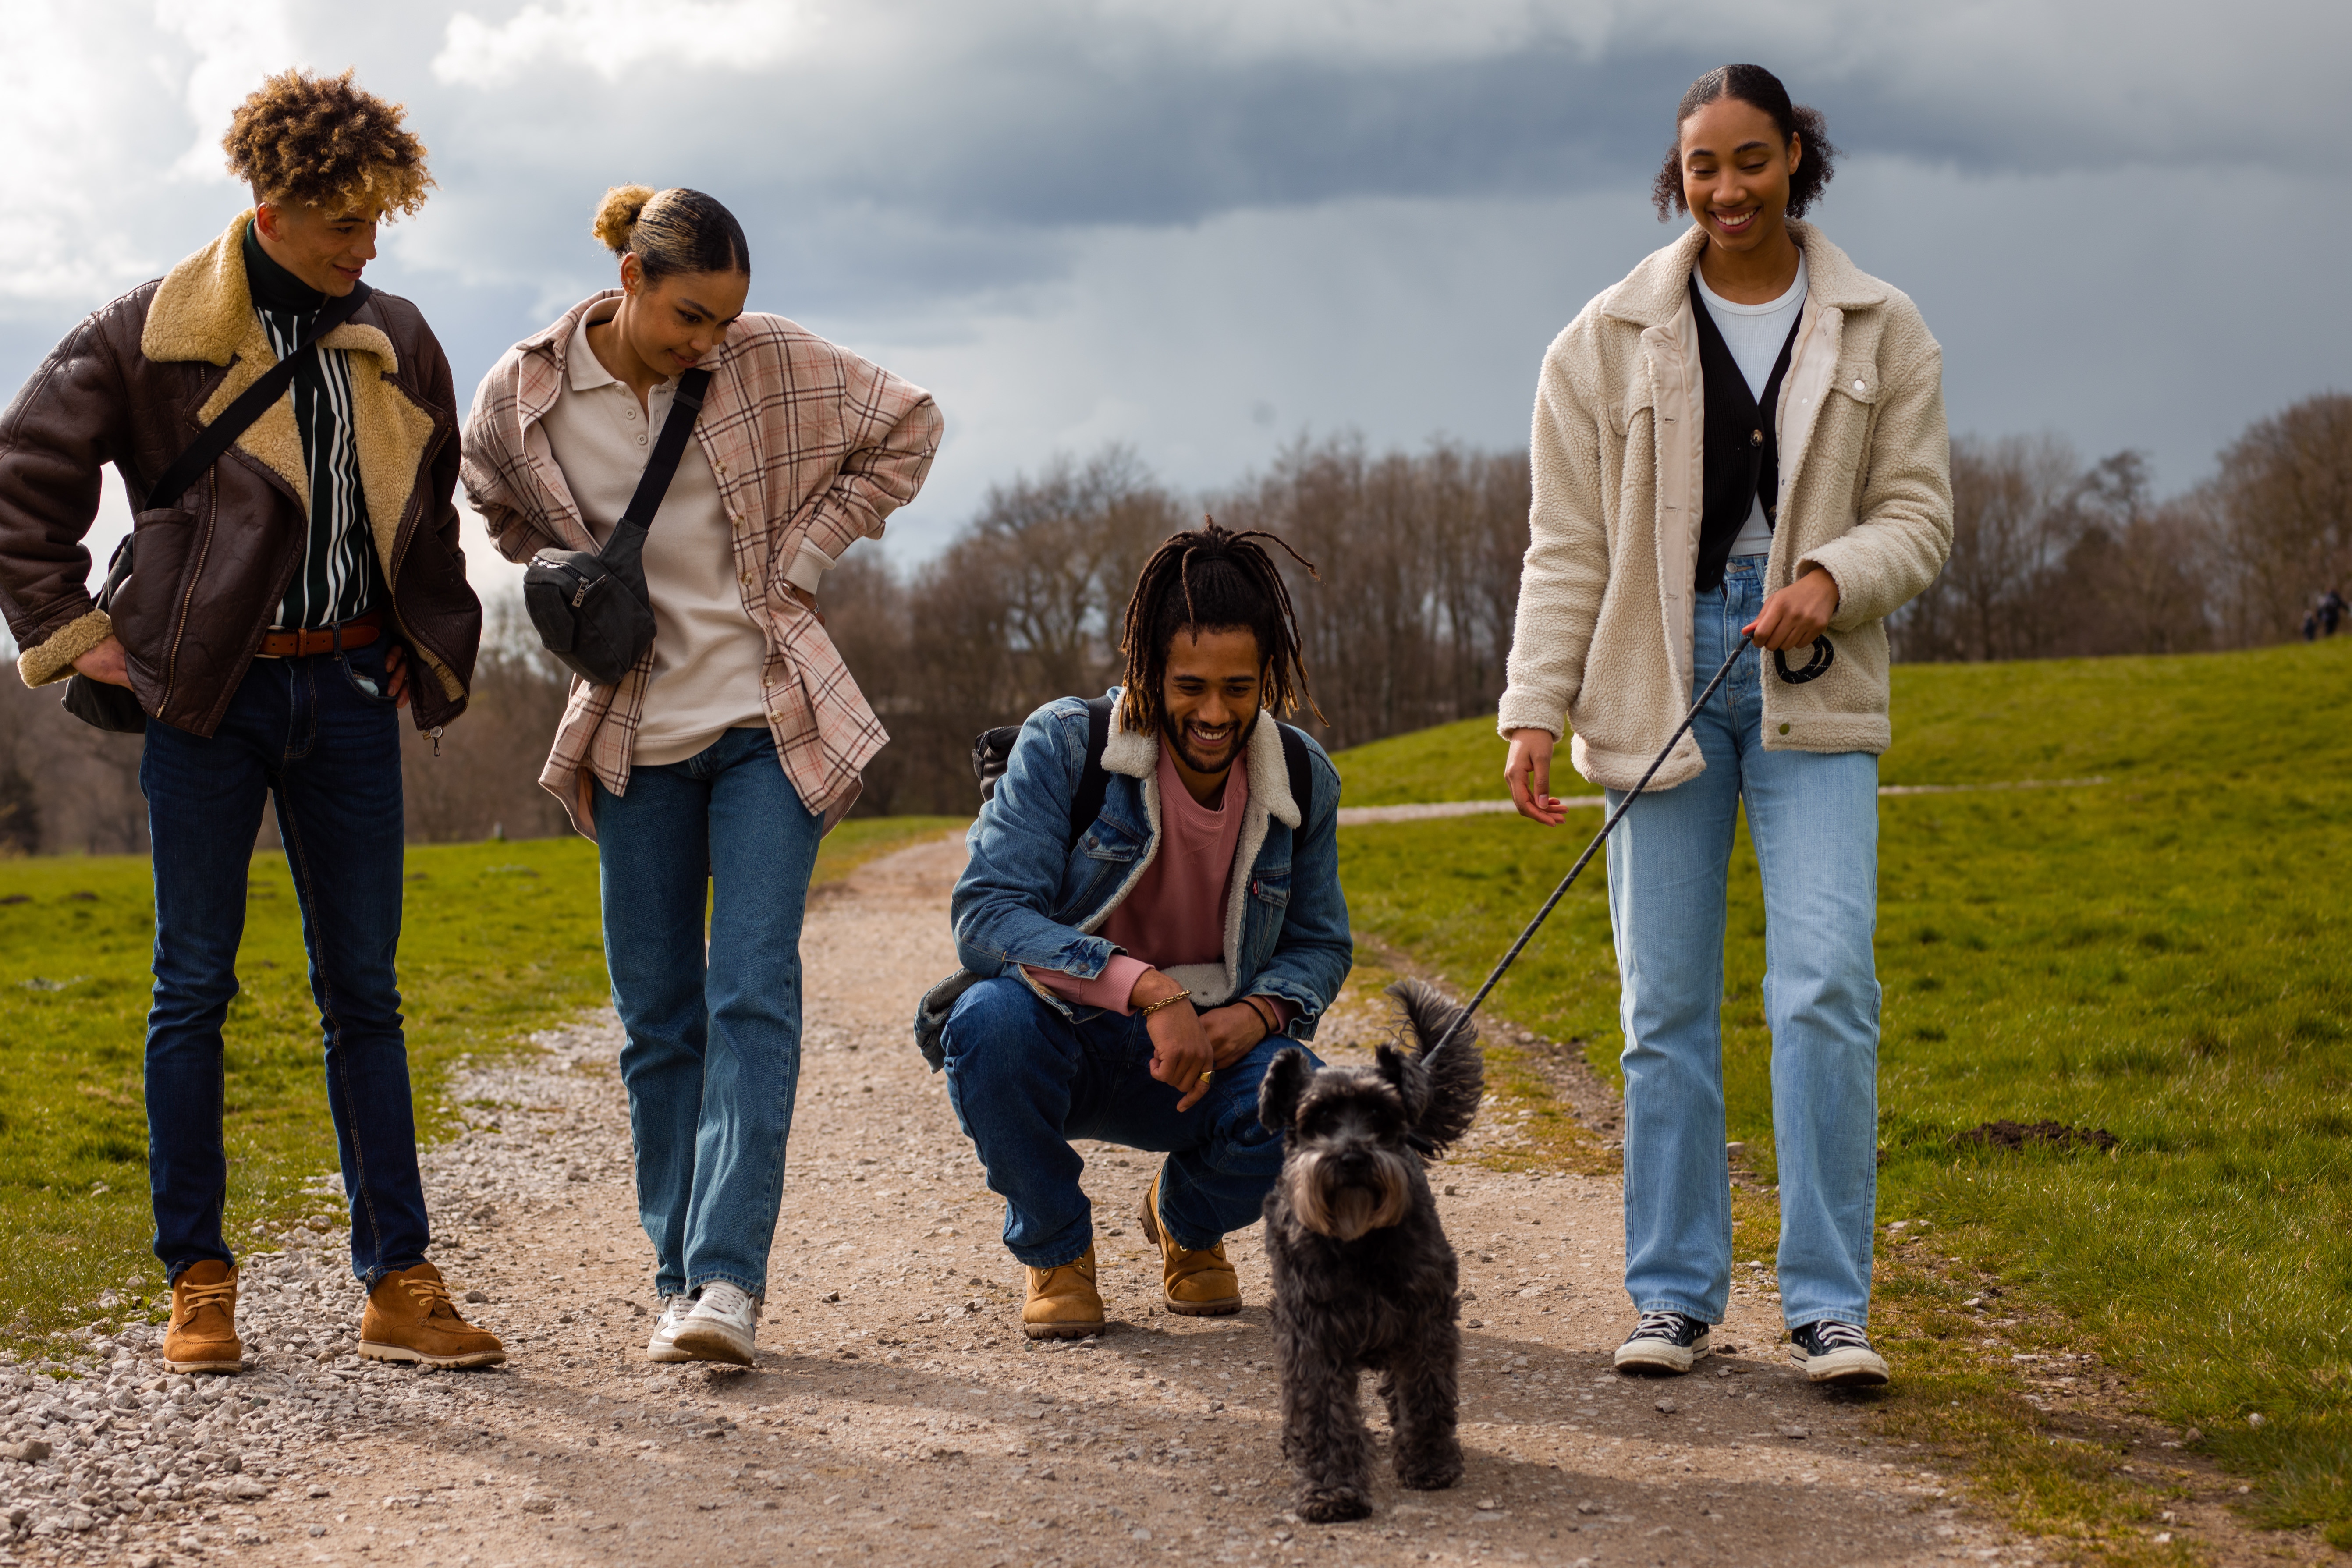 A group of 4 young people walking a small grey dog through the country park